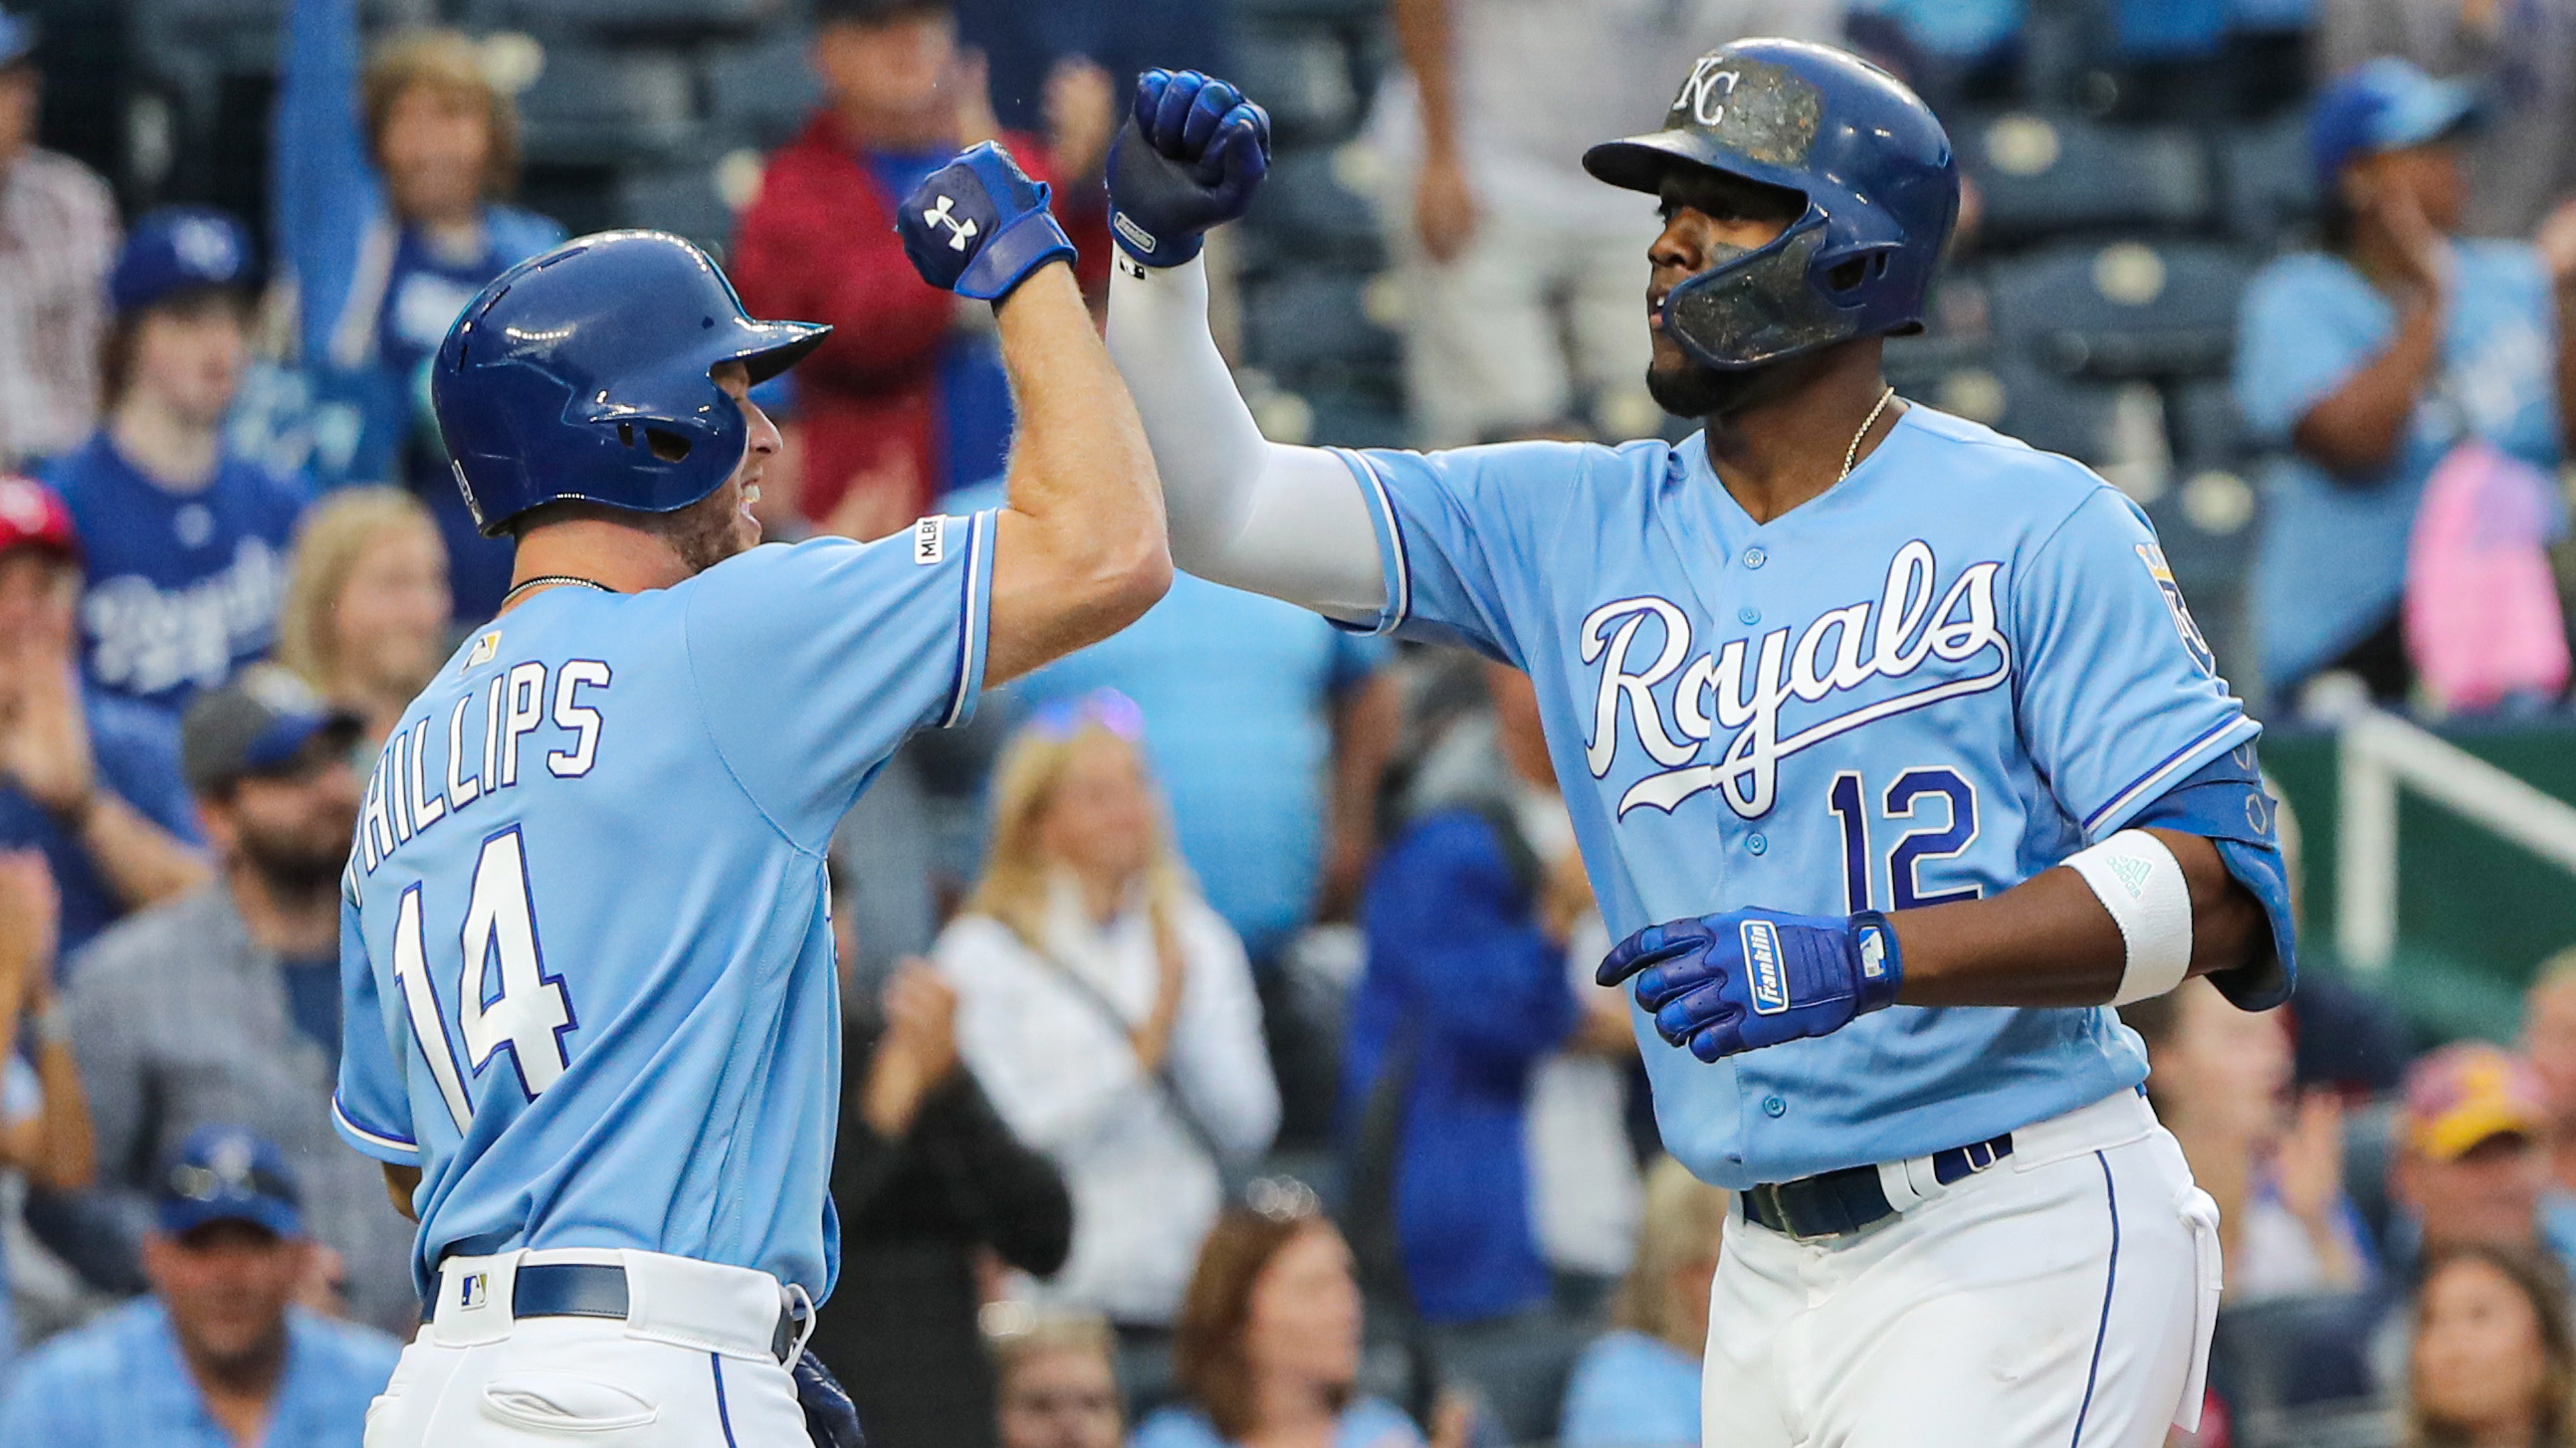 Soler homers twice for AL lead in Royals' 4-3 loss